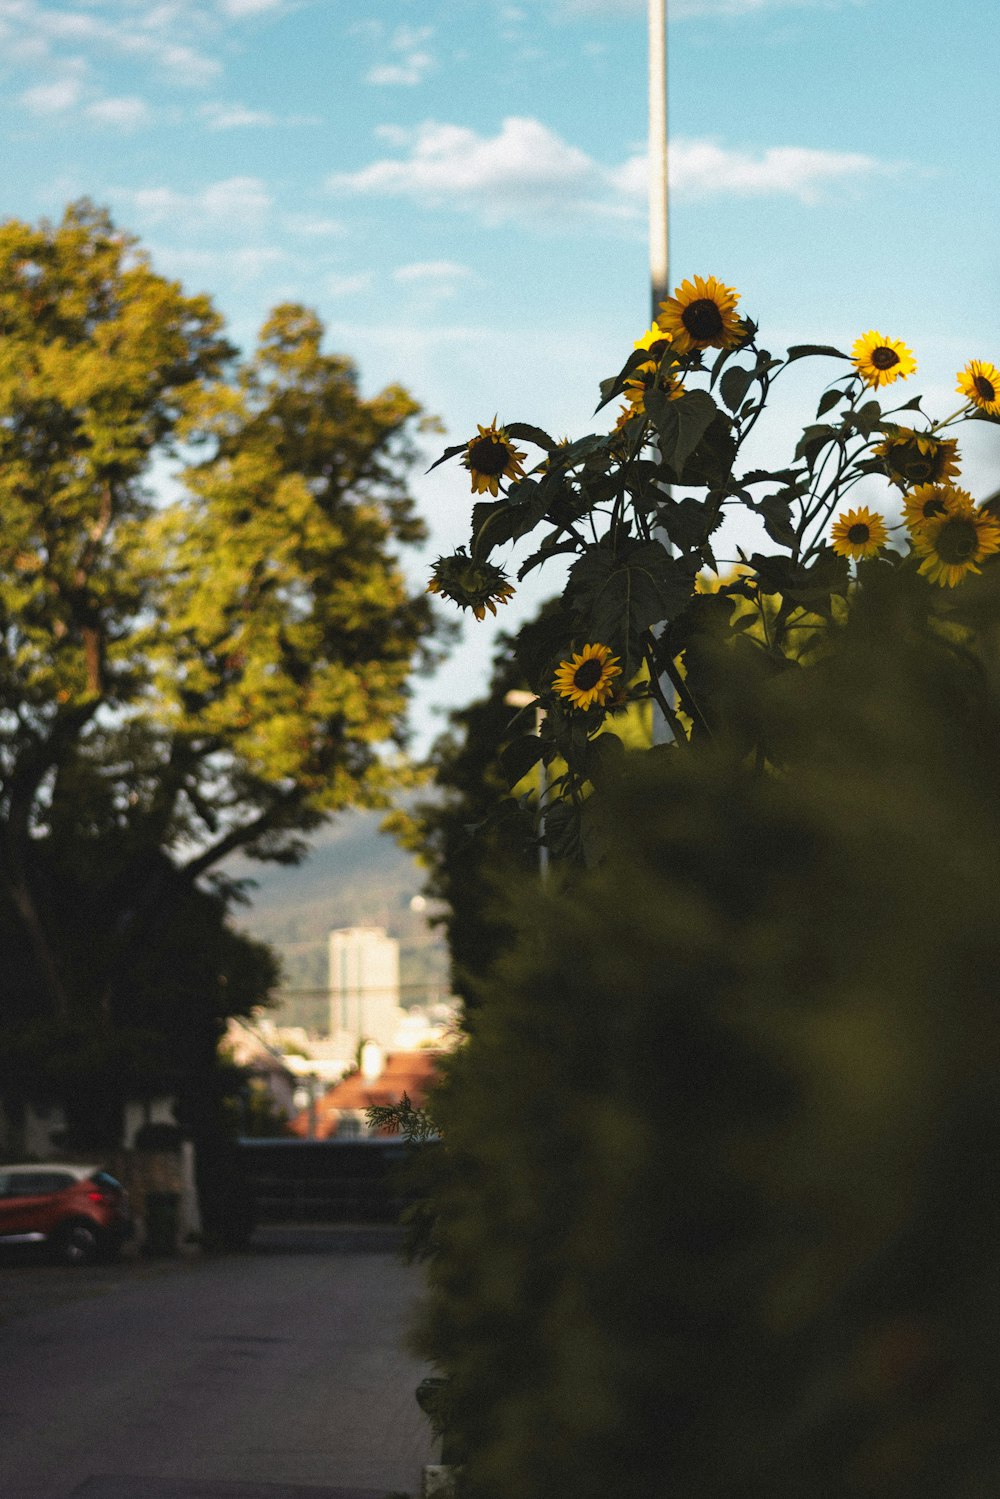 sunflowers in the foreground of a city street